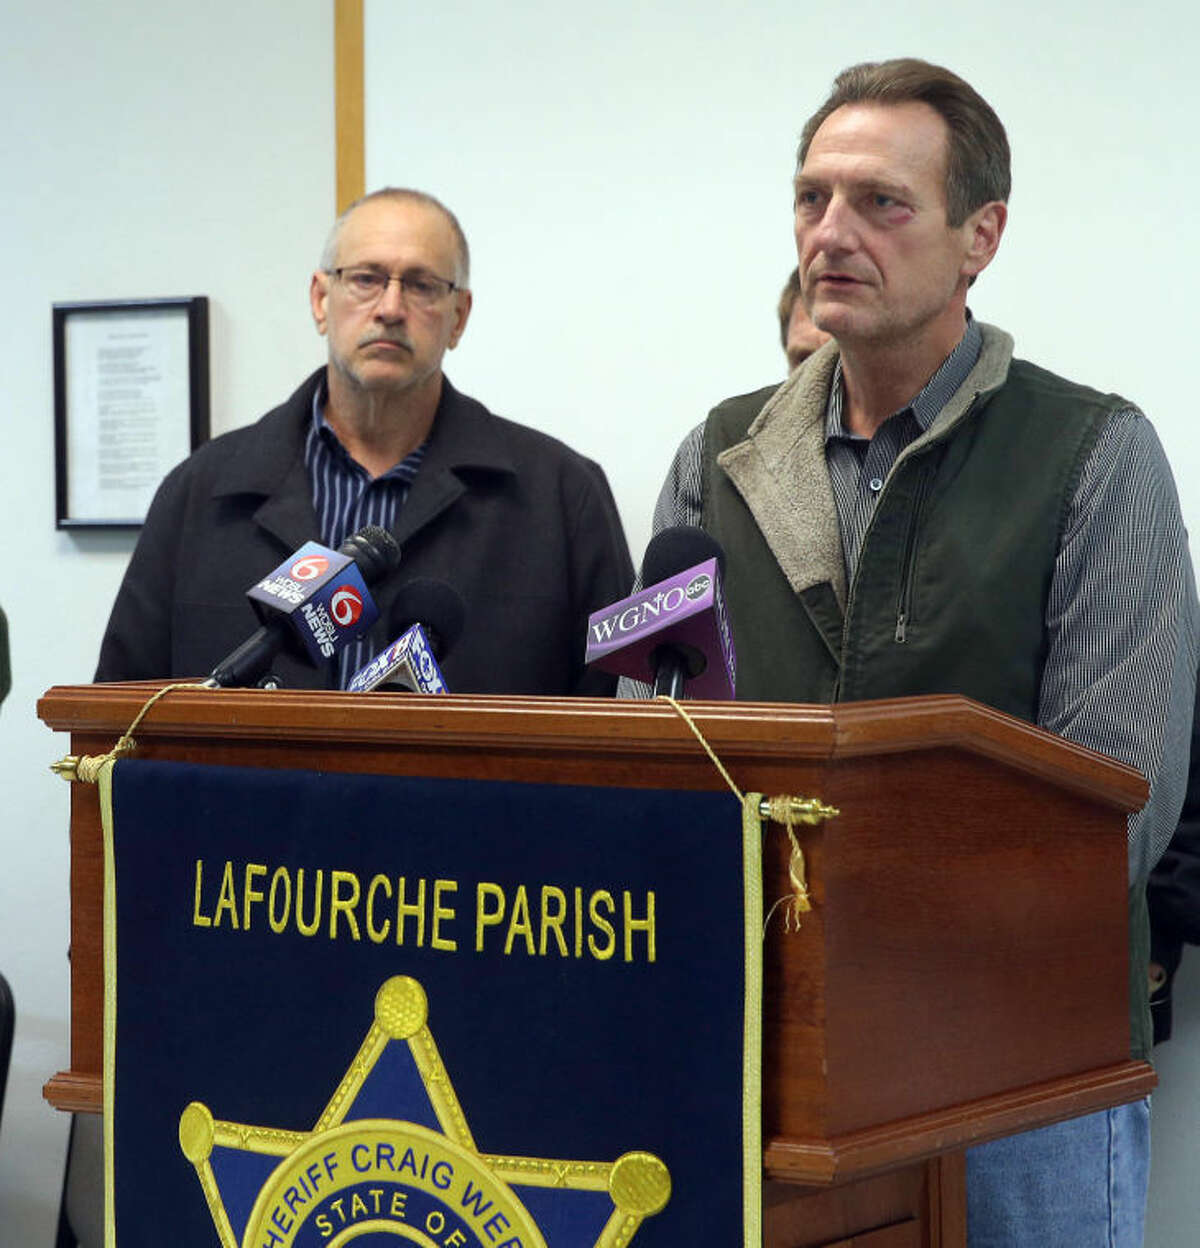 Lafourche Parish Sheriff Craig Webre, right, speaks during a news conference Thursday evening, in Lockport, La., after 38-year-old Ben Freeman went on a shooting rampage in four locations in two parishes in south Louisiana. Authorities say Freeman was embroiled in a custody fight with his ex-wife. He killed himself after attacking his current wife, his former in-laws and his onetime boss at a hospital that fired him. (AP Photo/The Daily Comet, Abby Tabor)